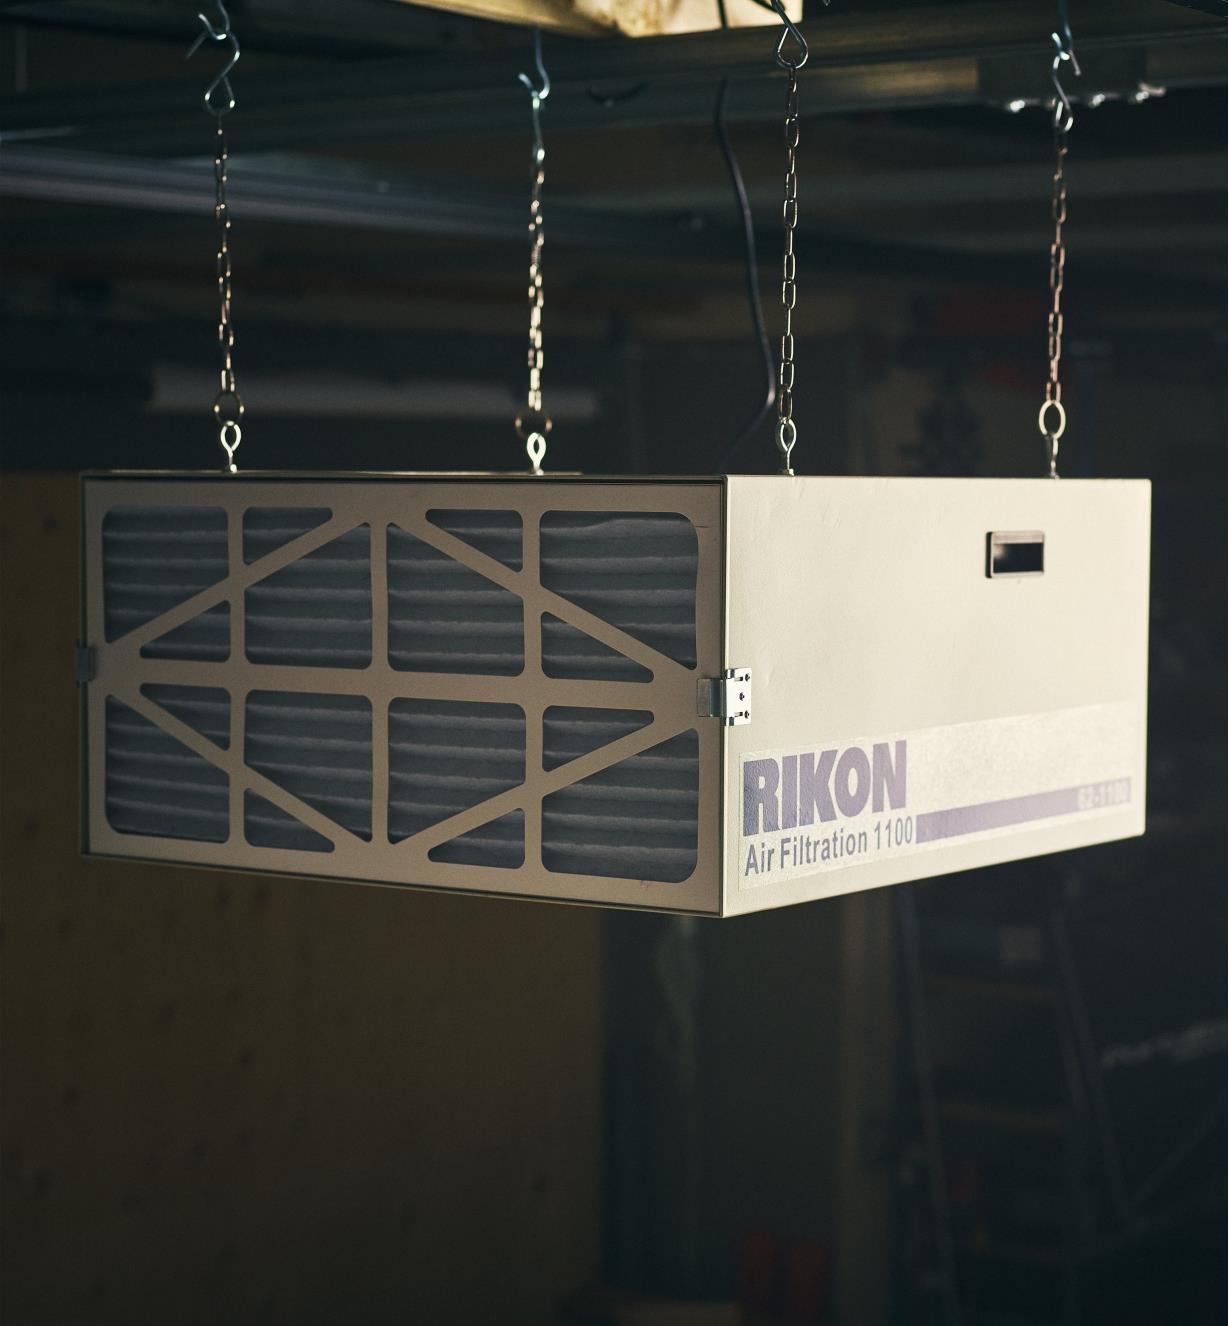 Rikon 1100 CFM air cleaner suspended from a ceiling